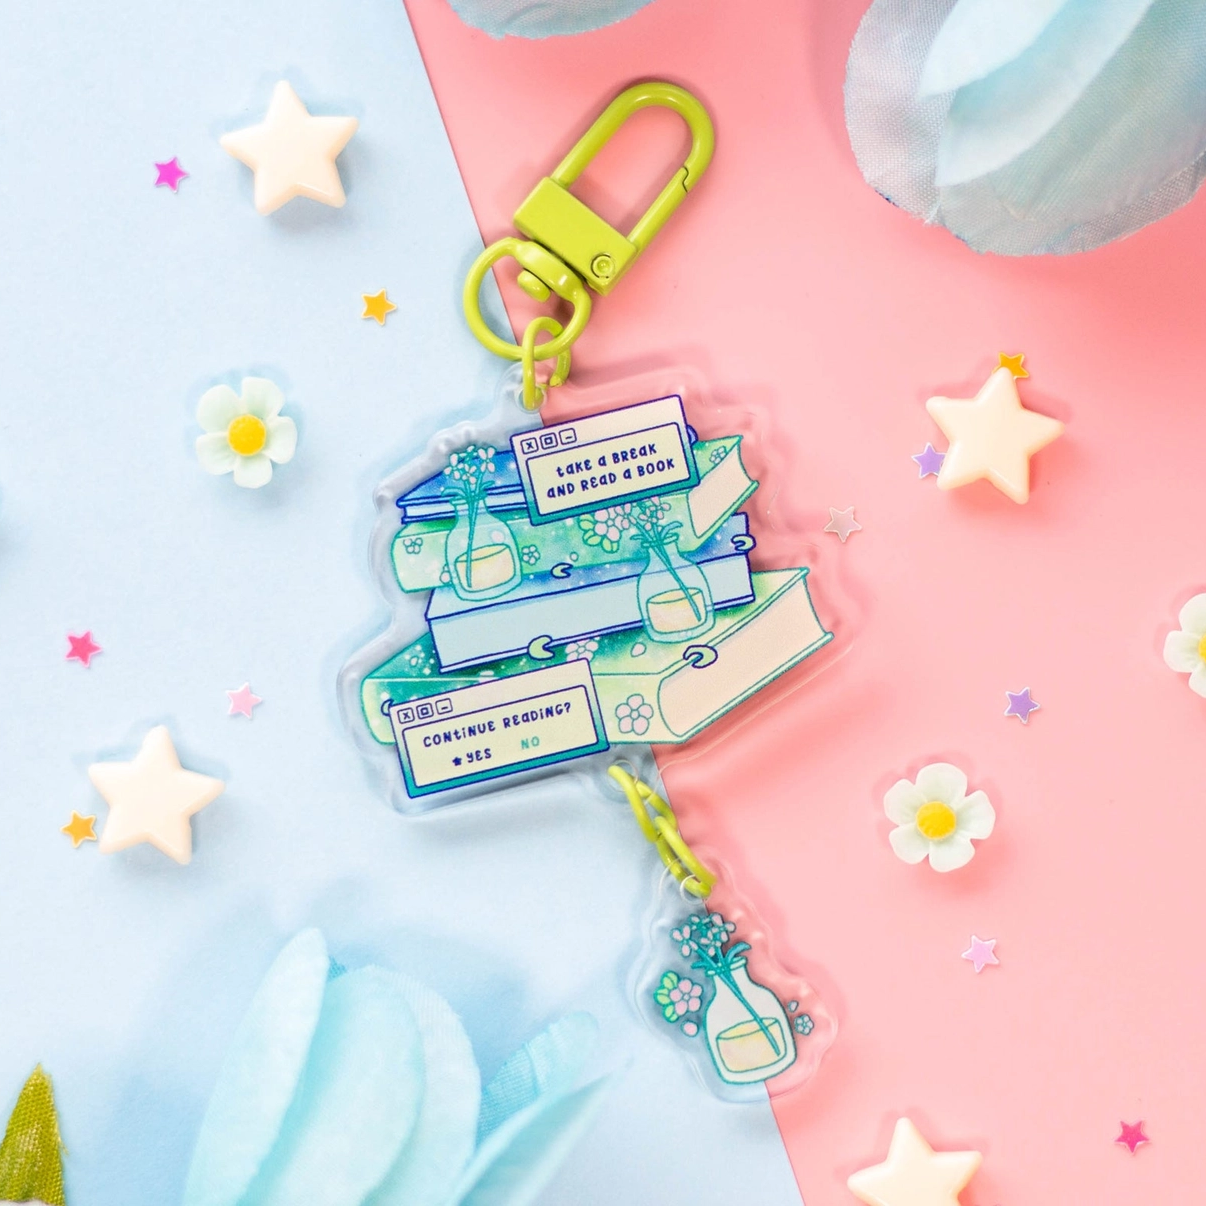 Unicorn Eclipse: "Stacked Books" Chained Key Chain